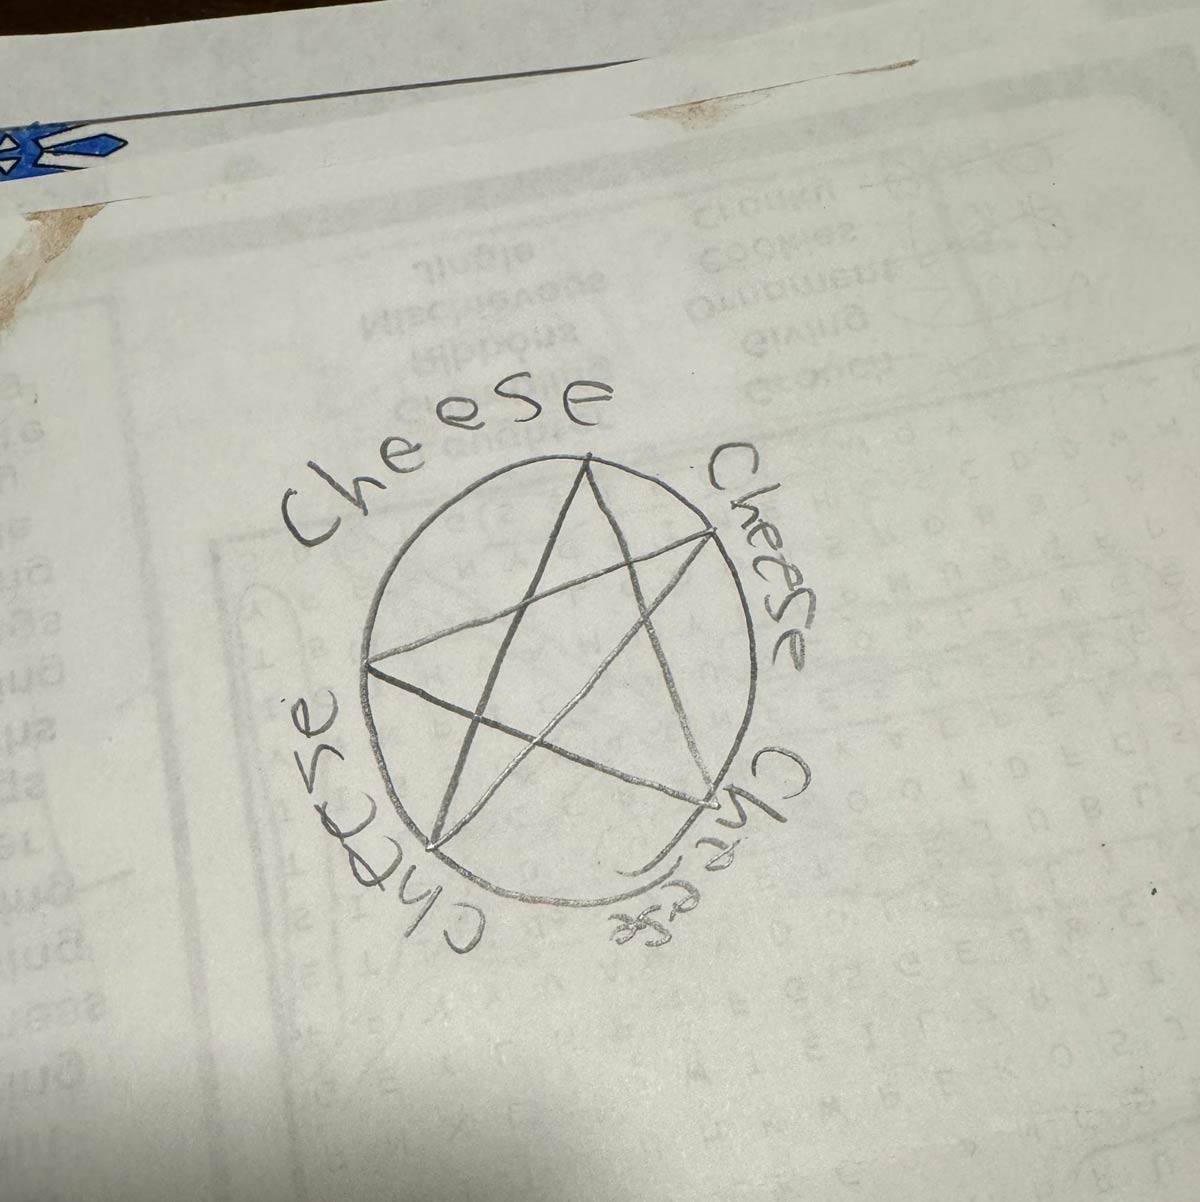 I found this on the back of my son's homework